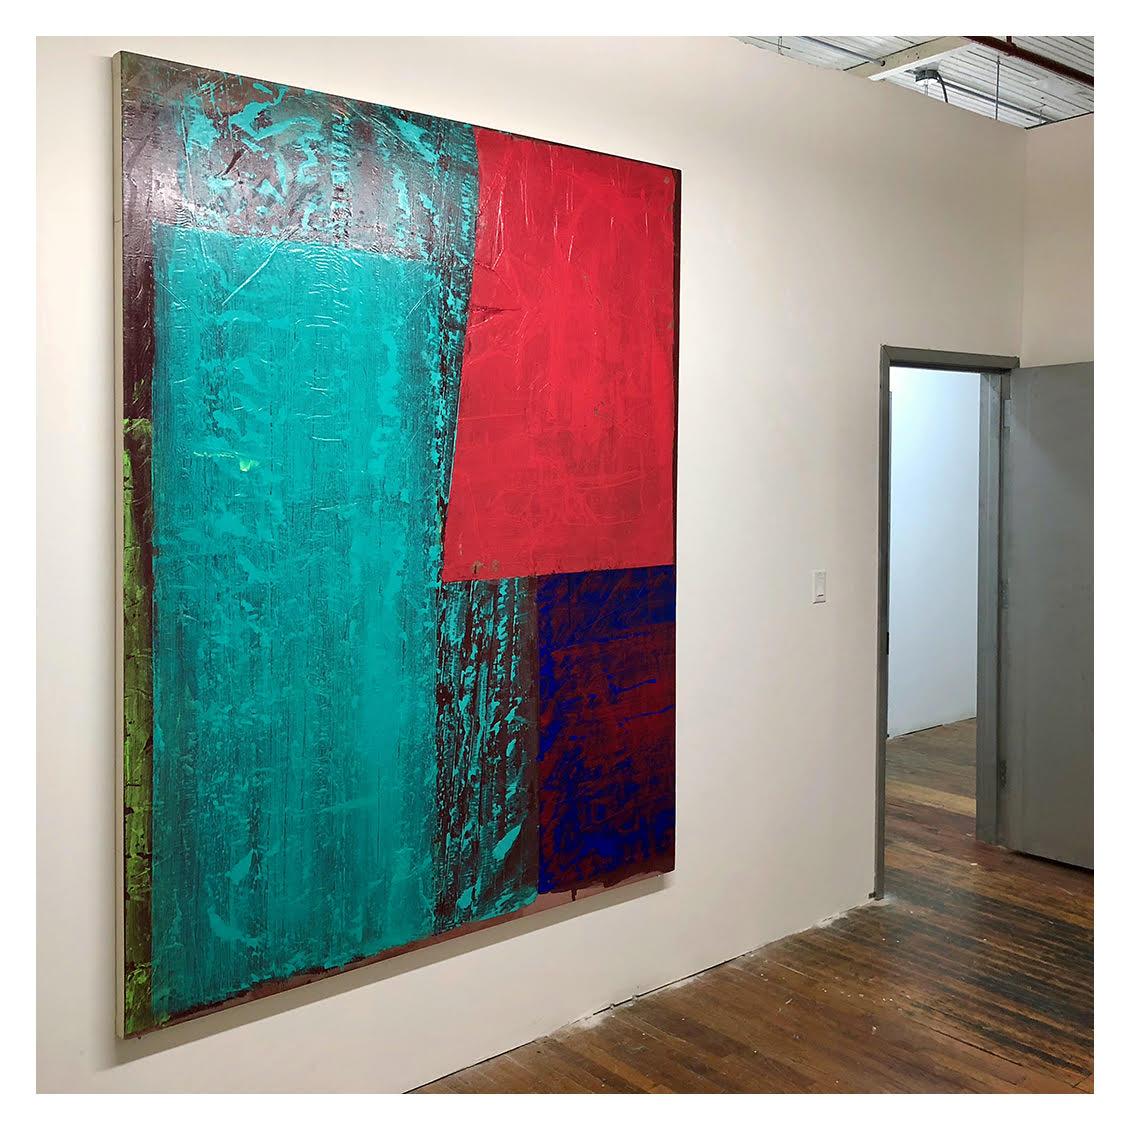 Lucinda River, large, bold geometric abstract w turquoise red glossy textured - Painting by Jeffrey Kurland